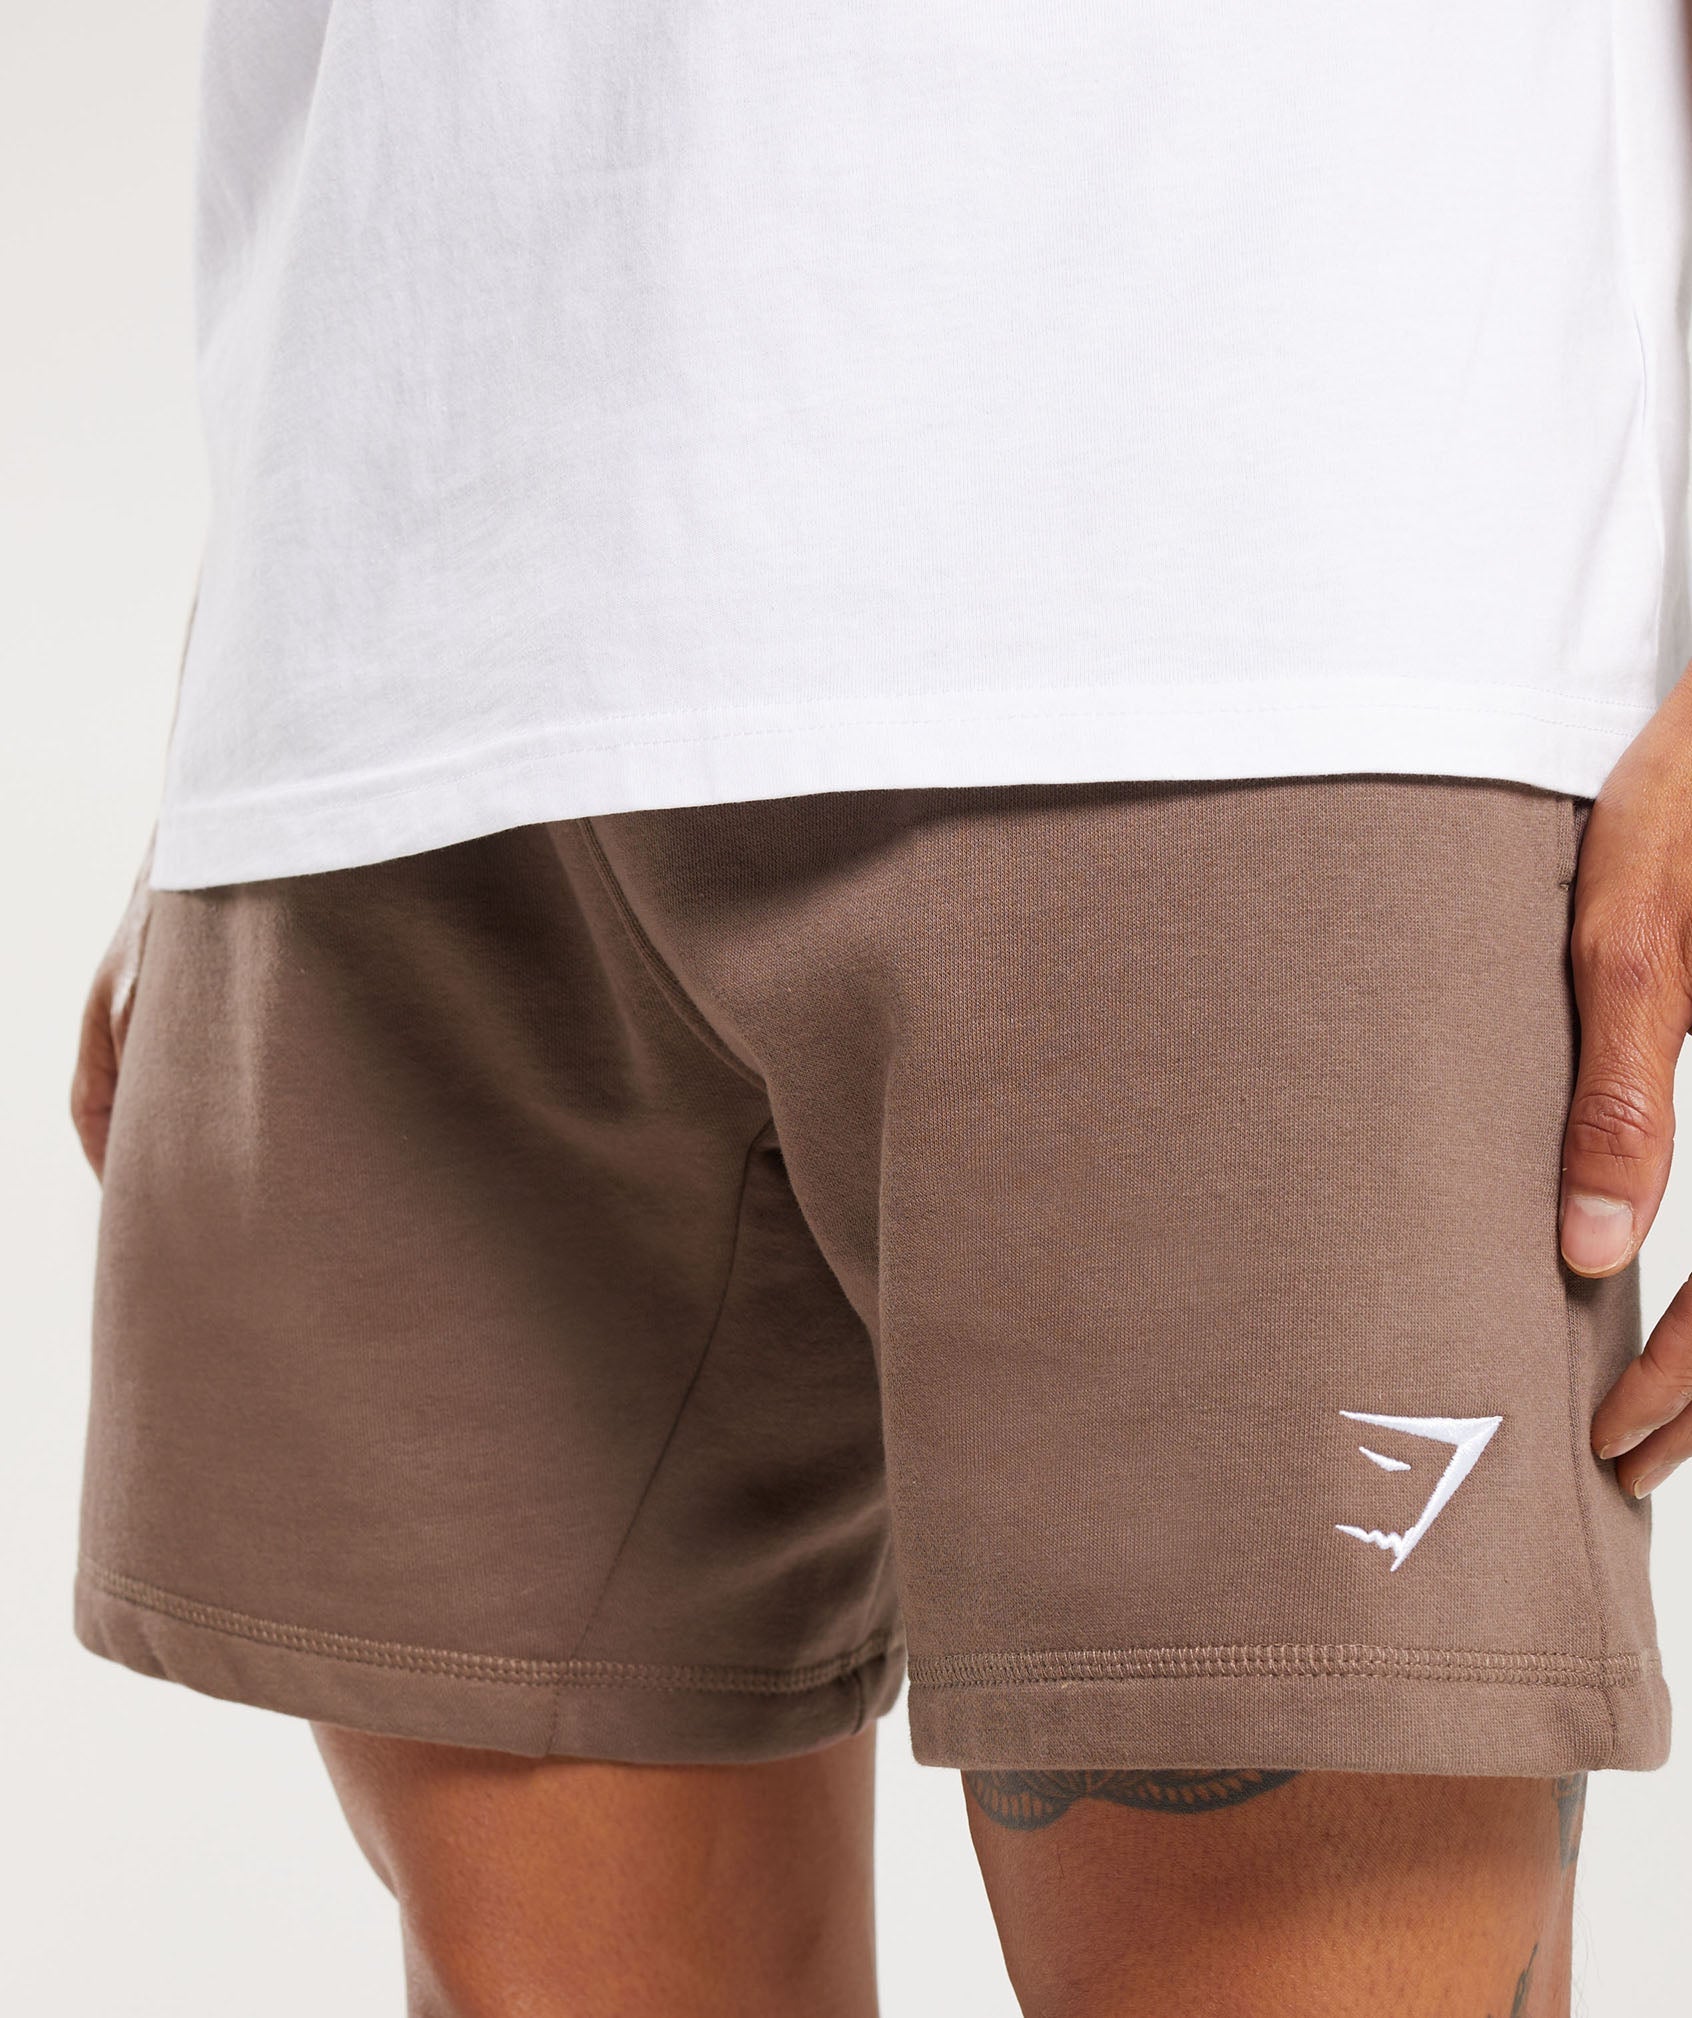 Crest Shorts in Truffle Brown - view 5